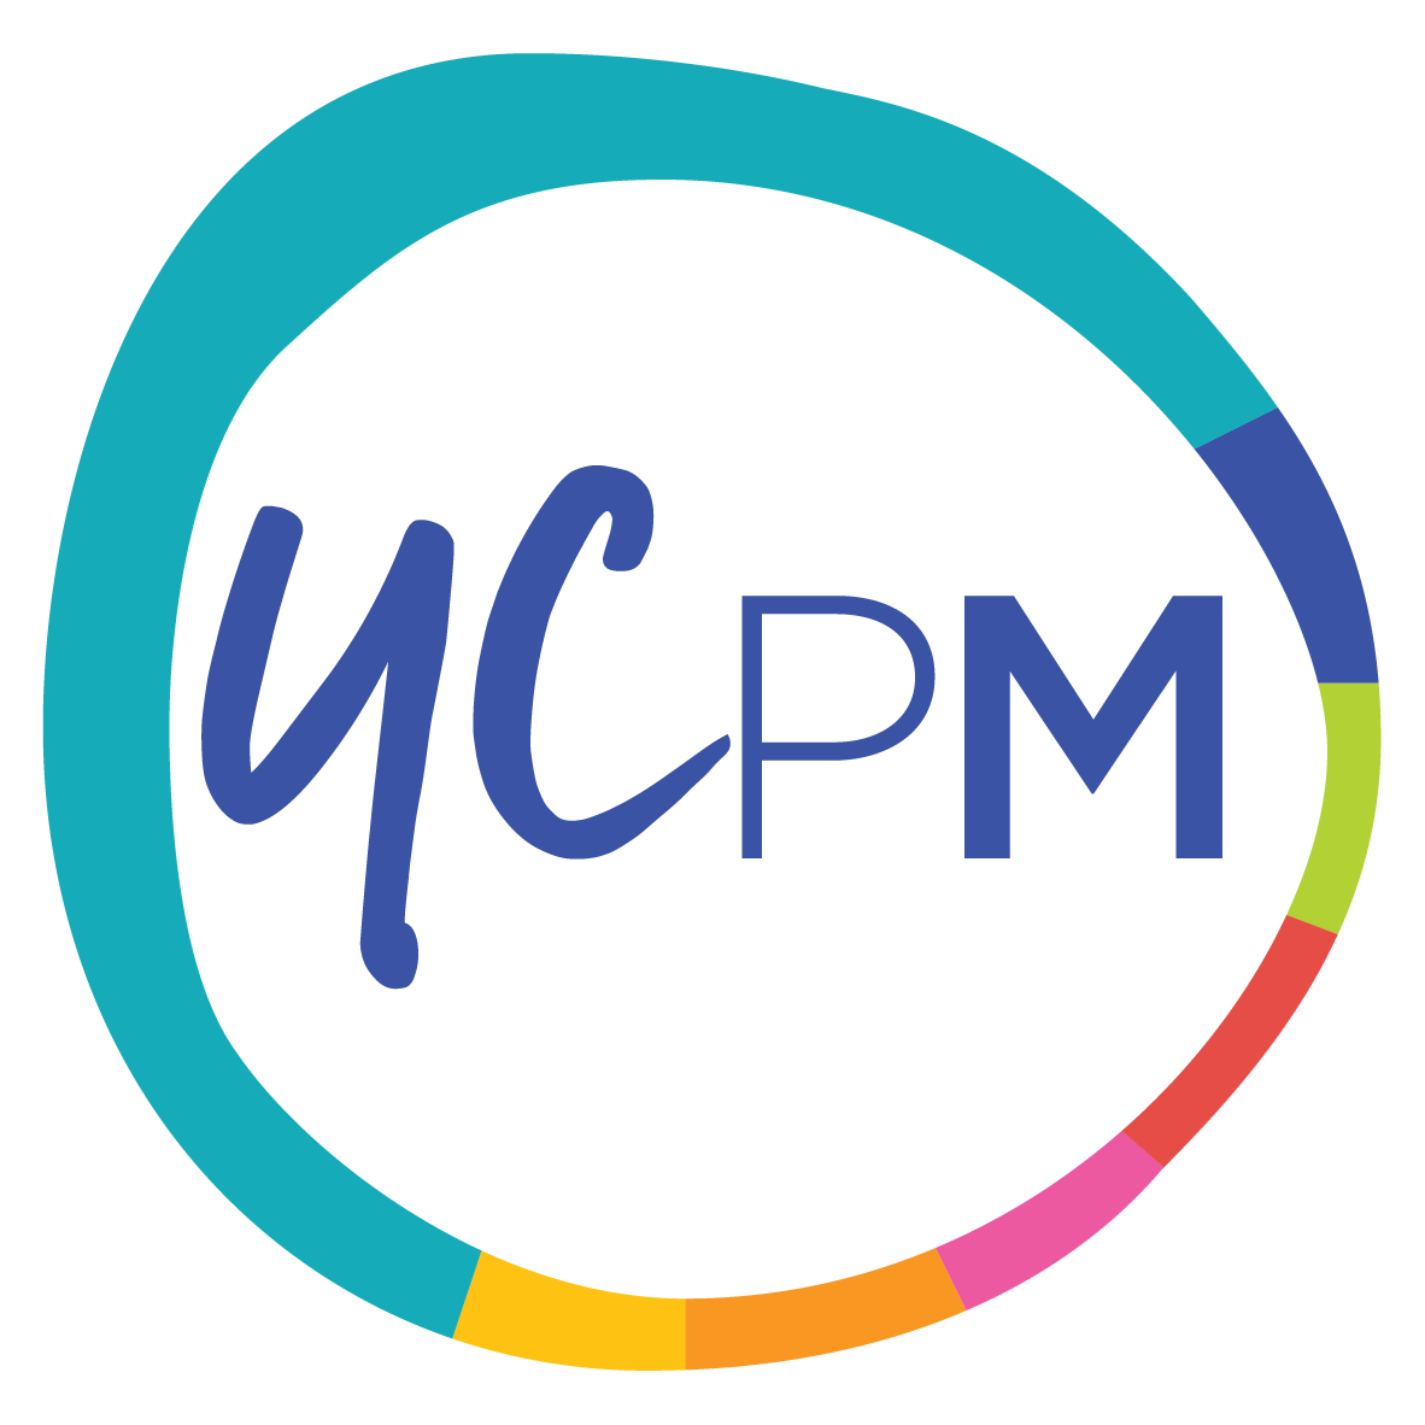 YCPM Client